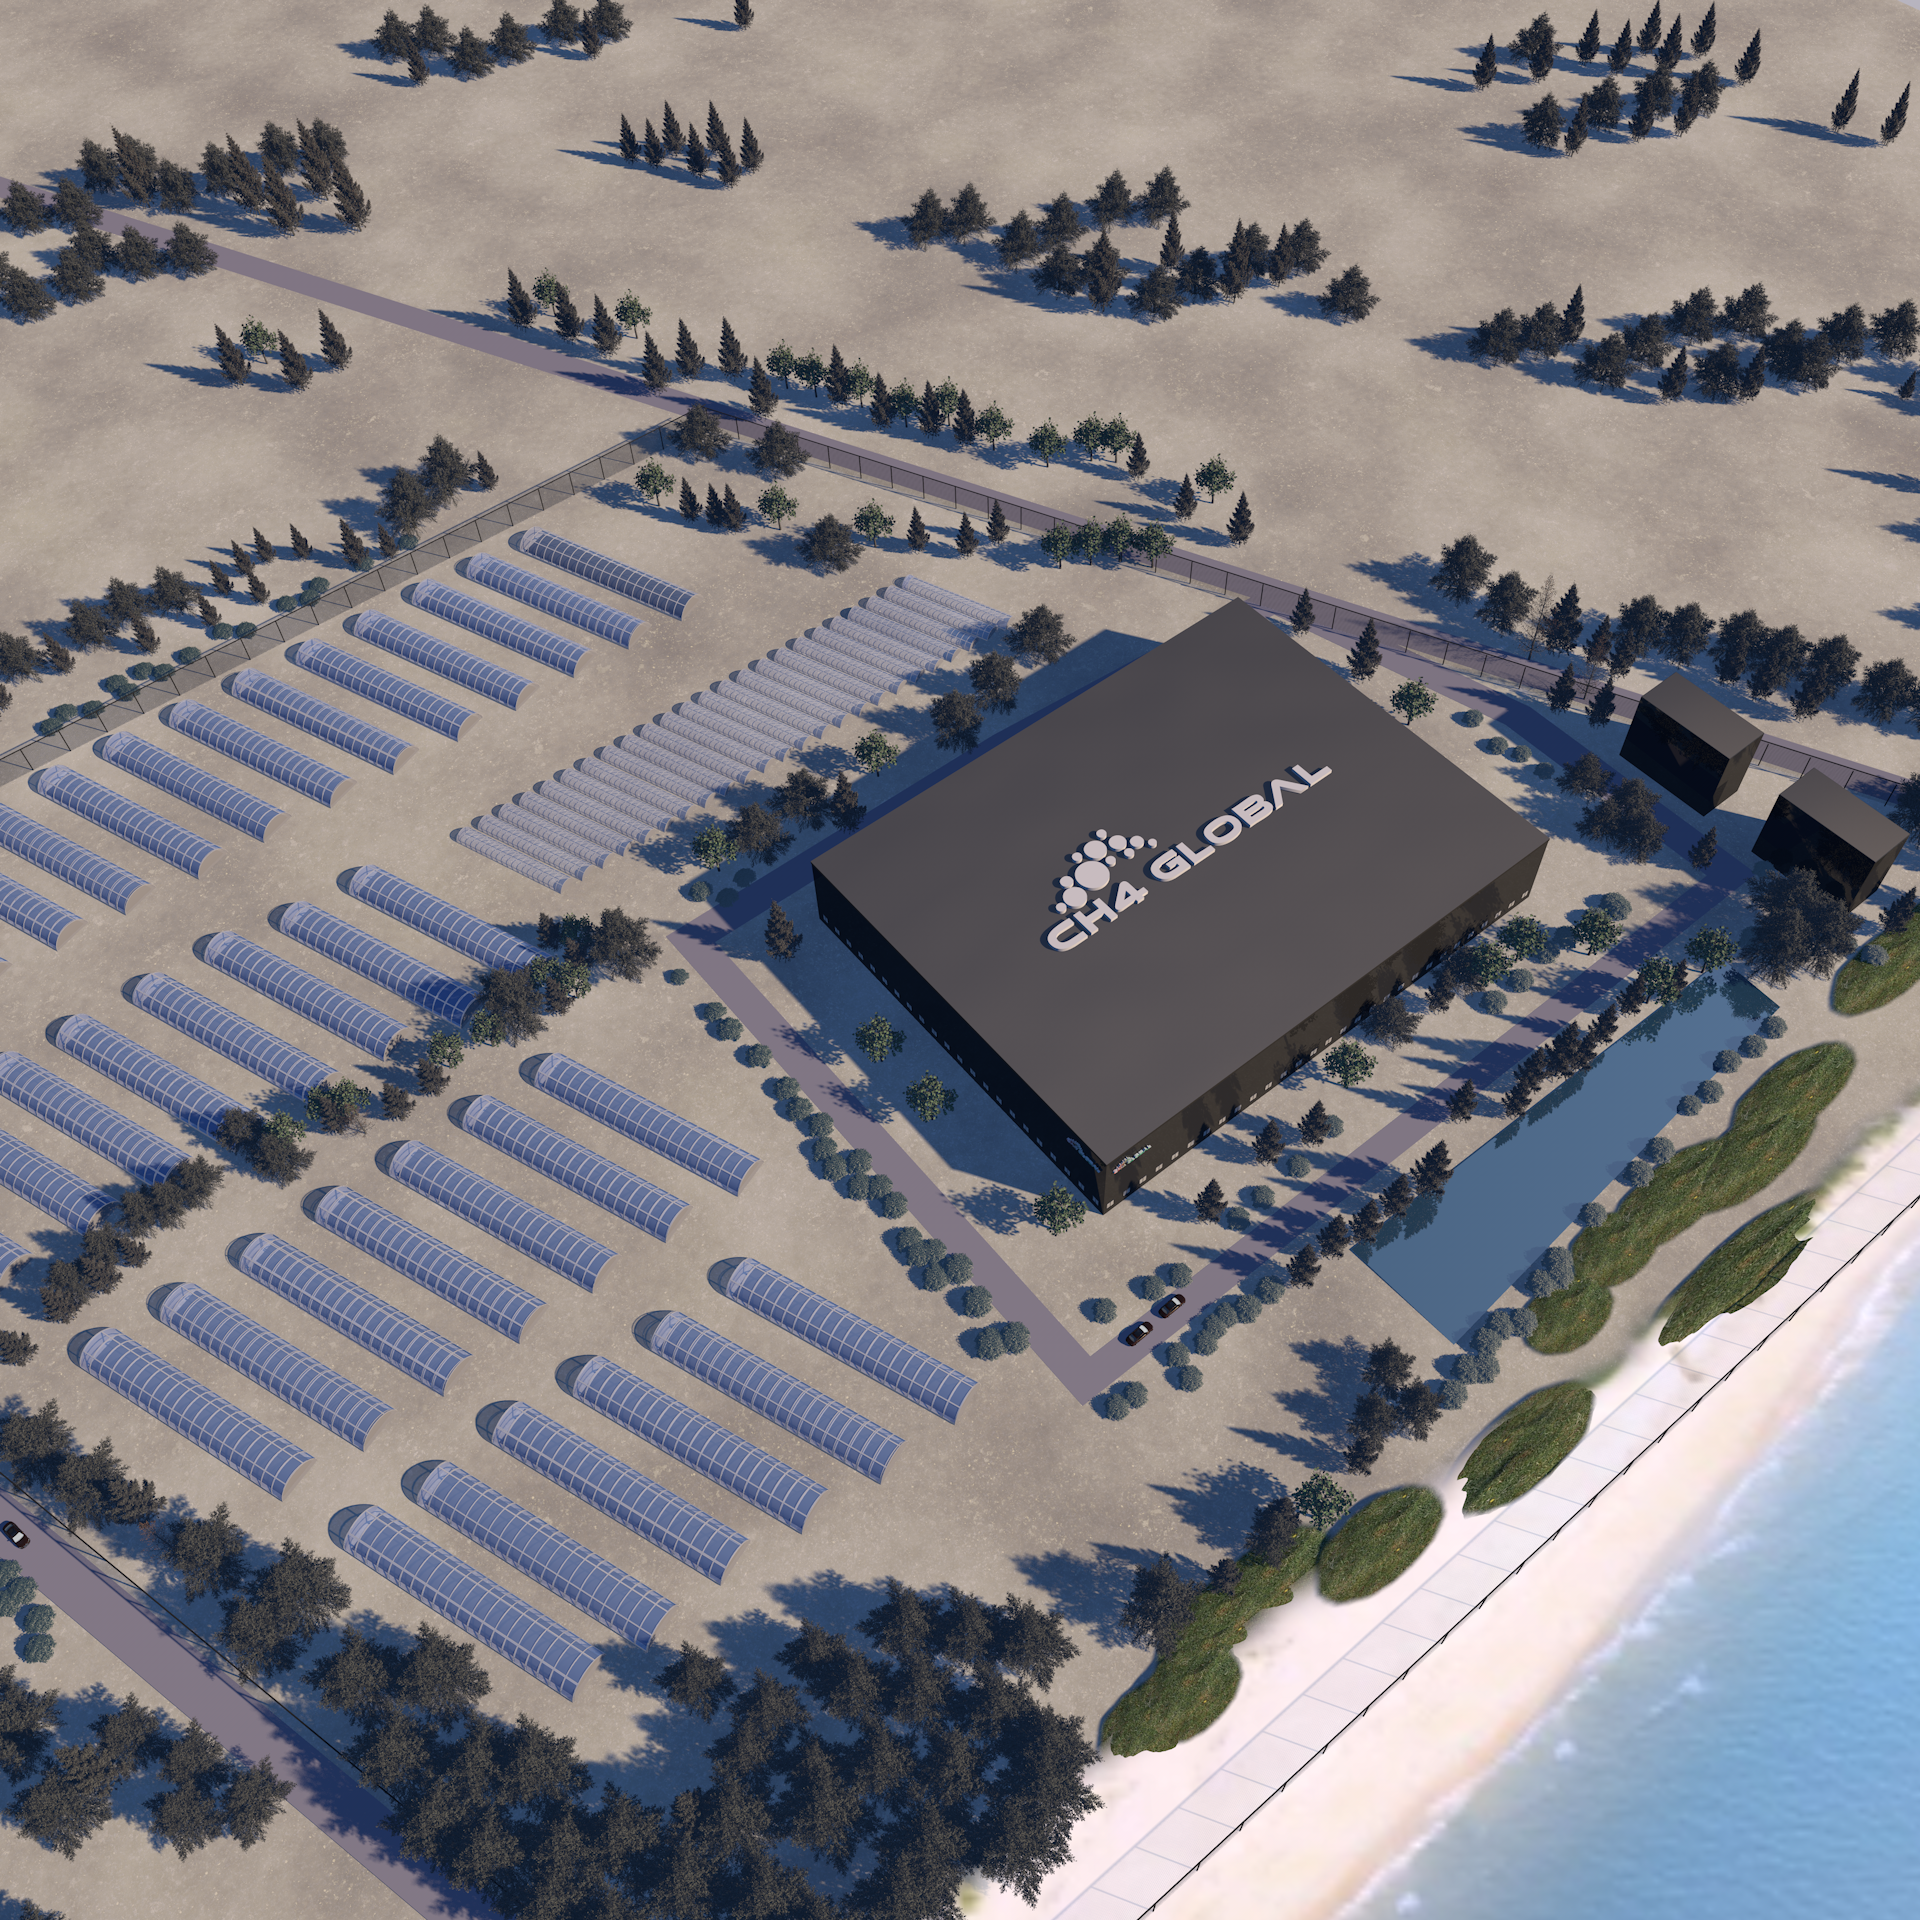 CH4 Global to Build its First Full-Scale EcoPark on Eyre Peninsula